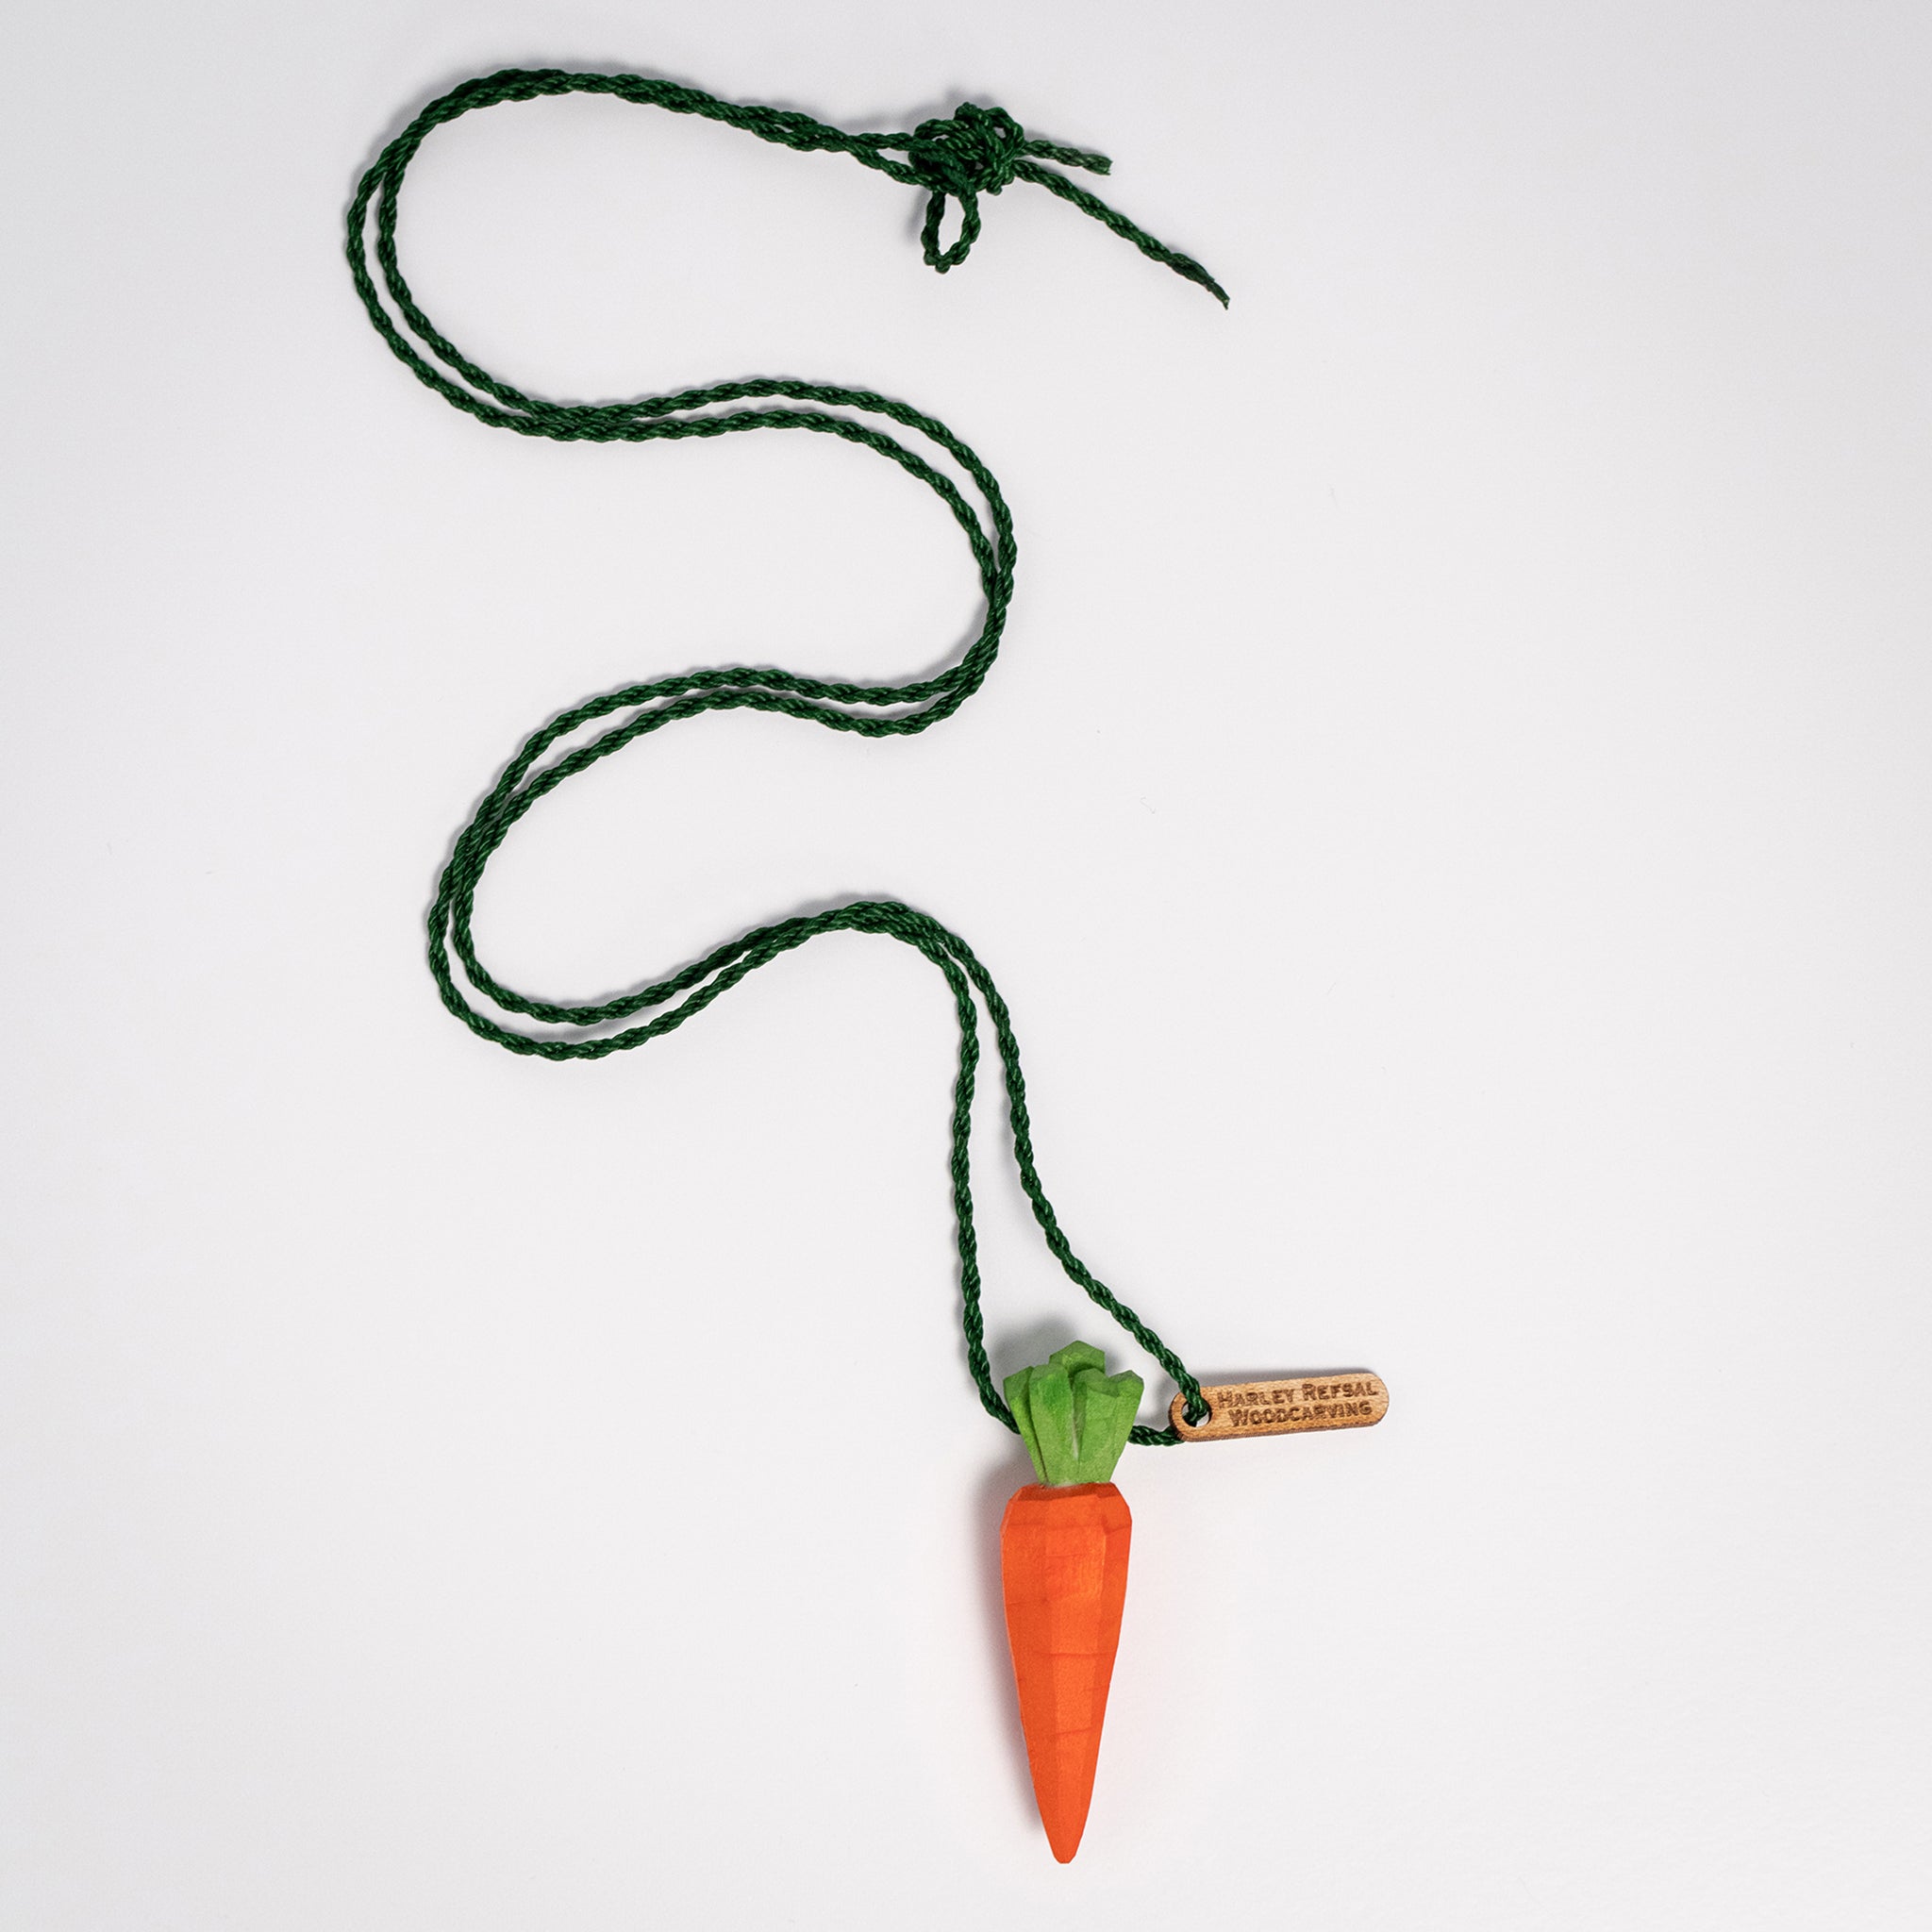 Artisan One-Carat (Carrot) Necklace by Harley Refsal